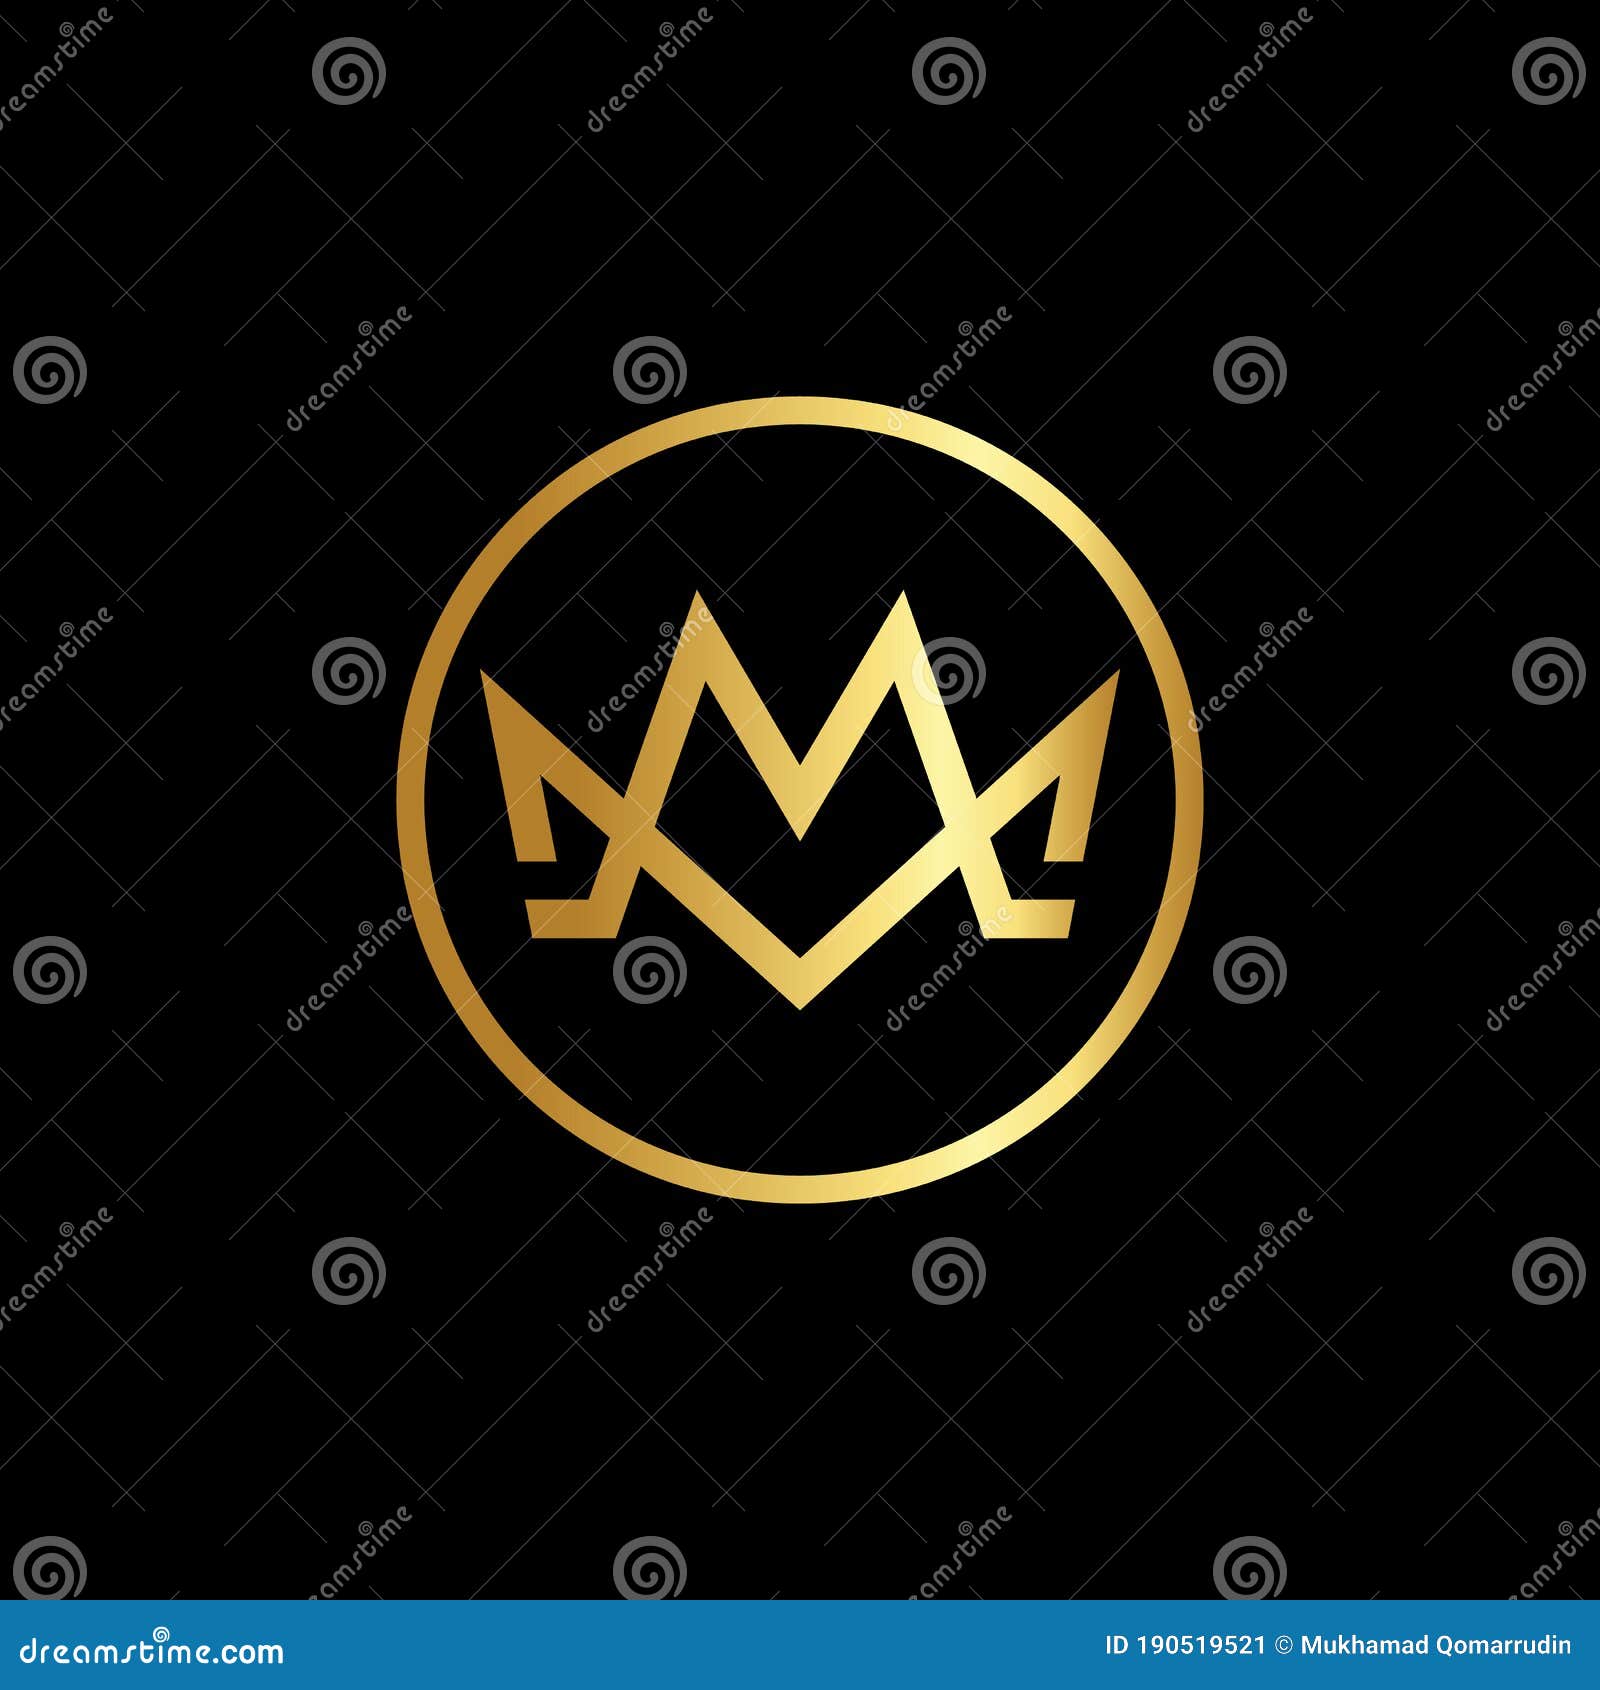 Luxury Monogram MM Crown Logo with Gradient Gold Color and Black Background  Stock Illustration - Illustration of circular, gradient: 190519521